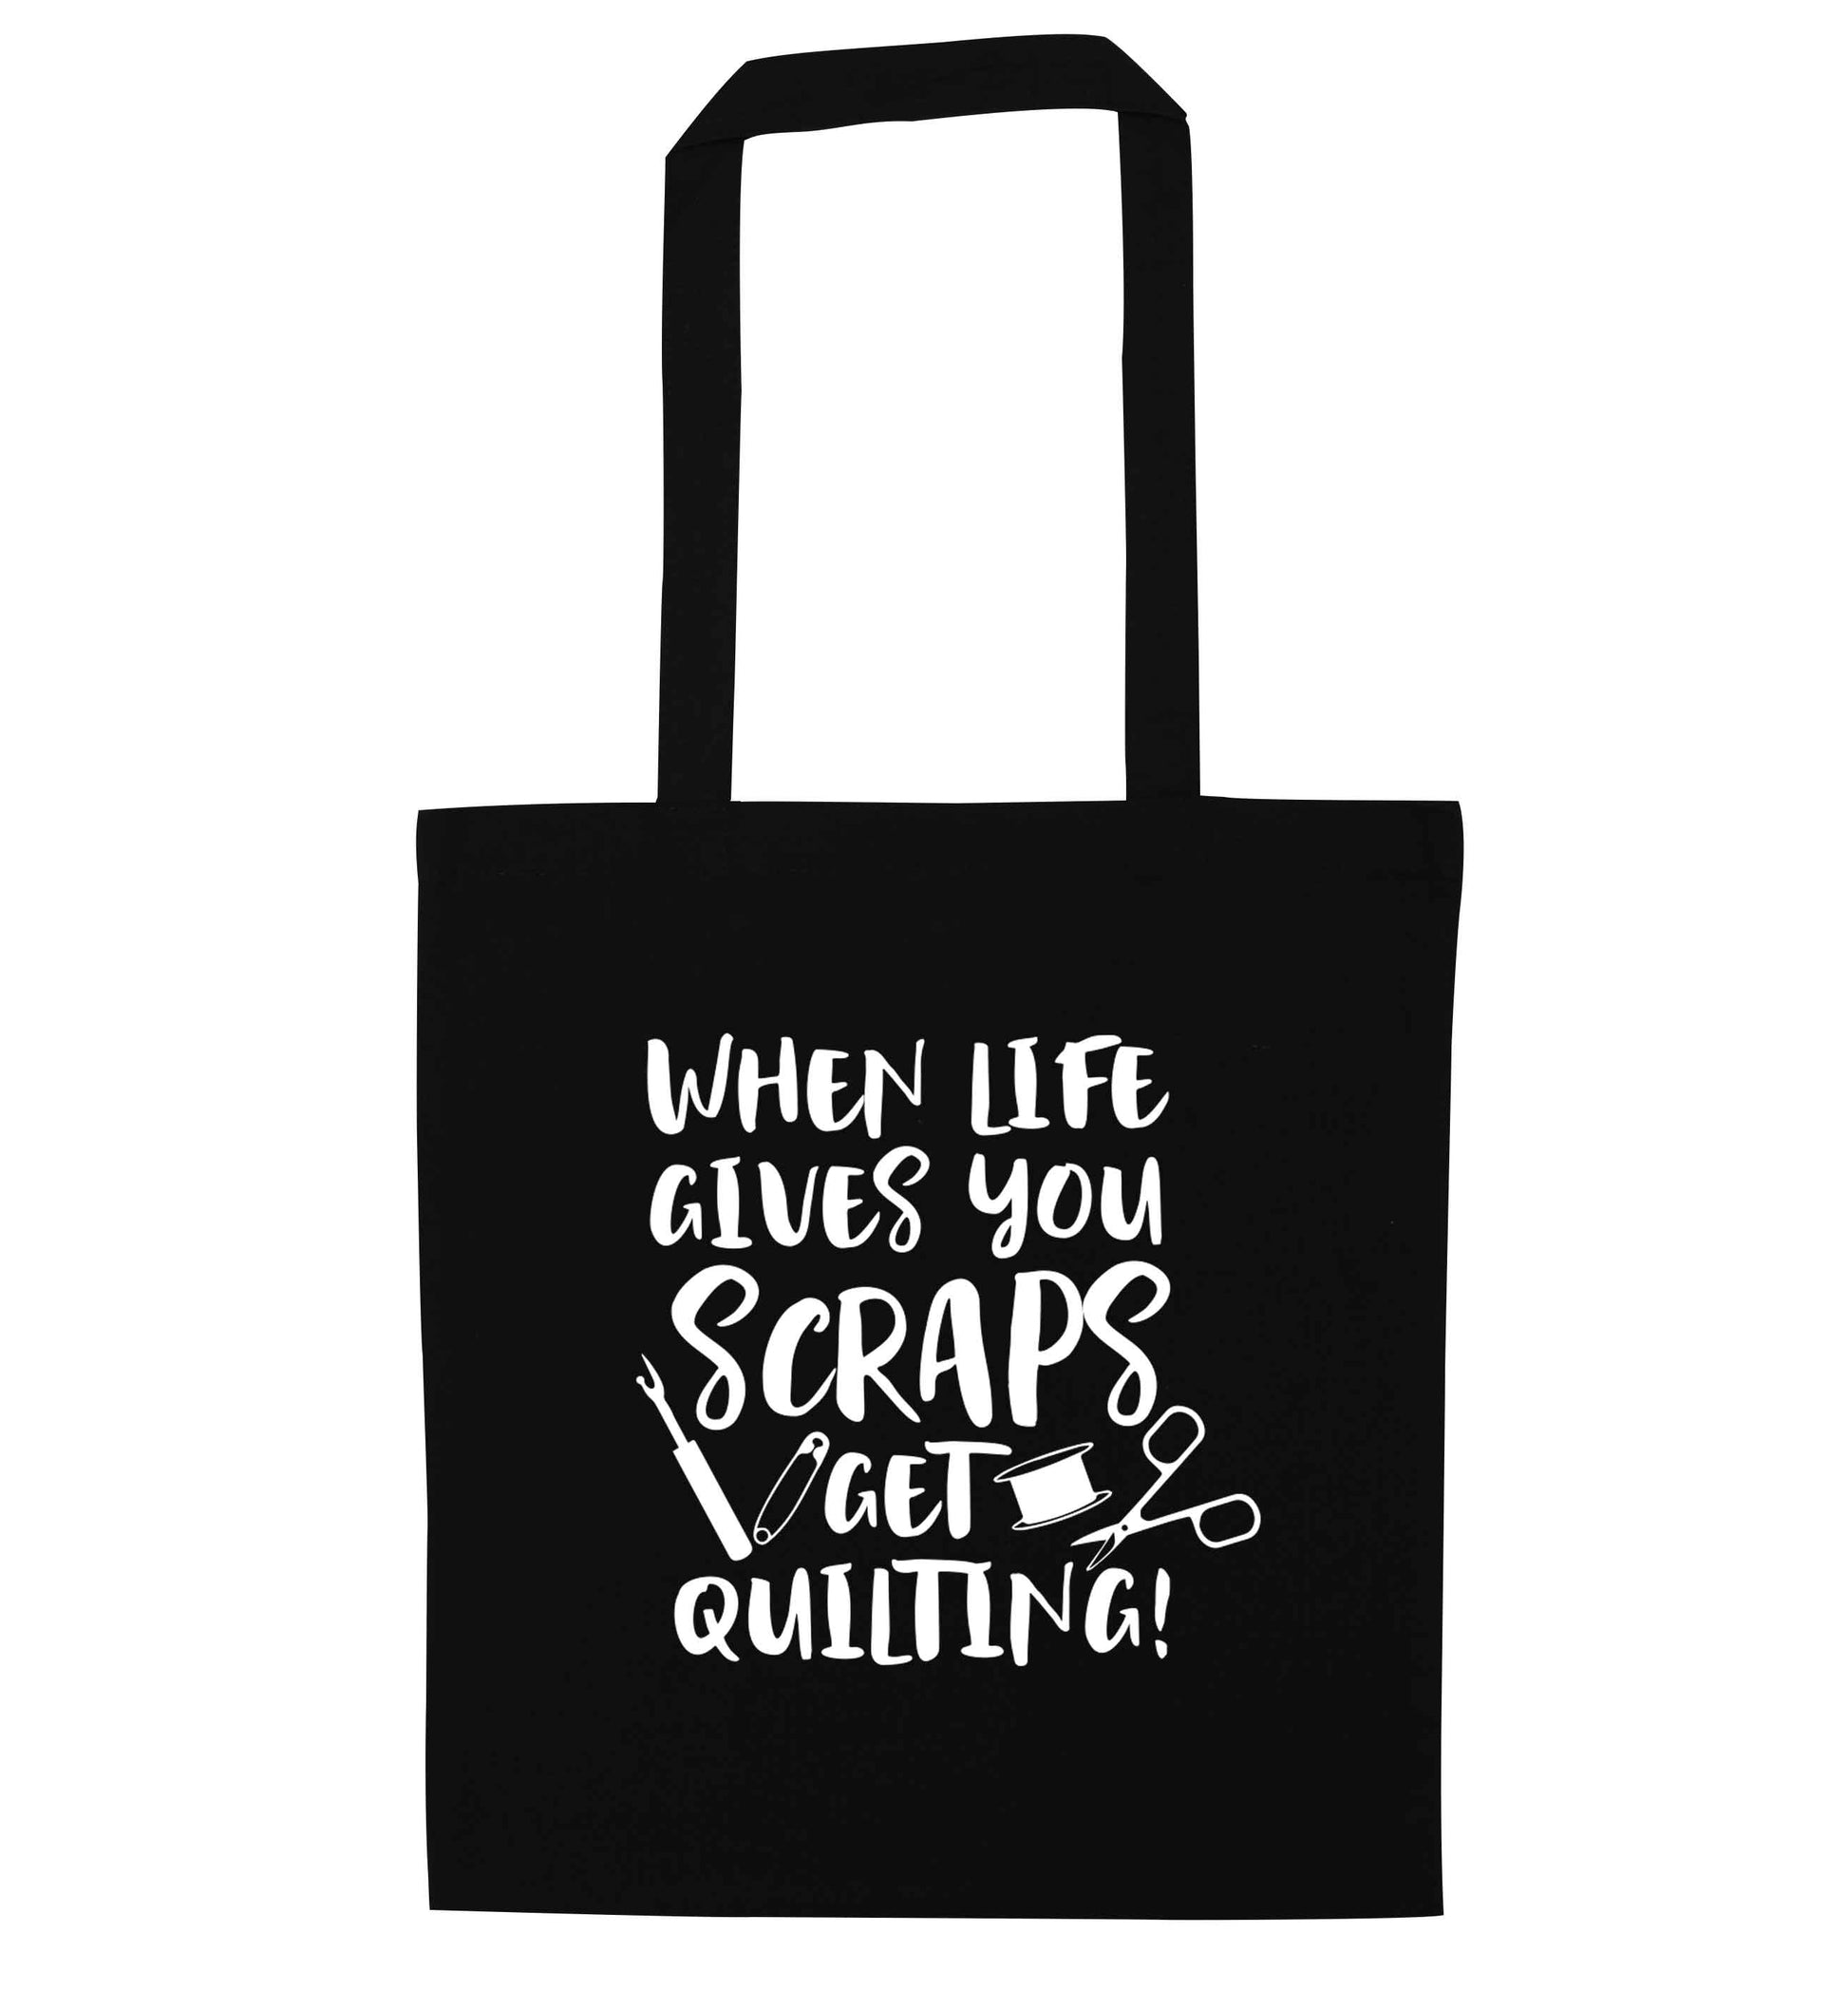 When life gives you scraps get quilting! black tote bag